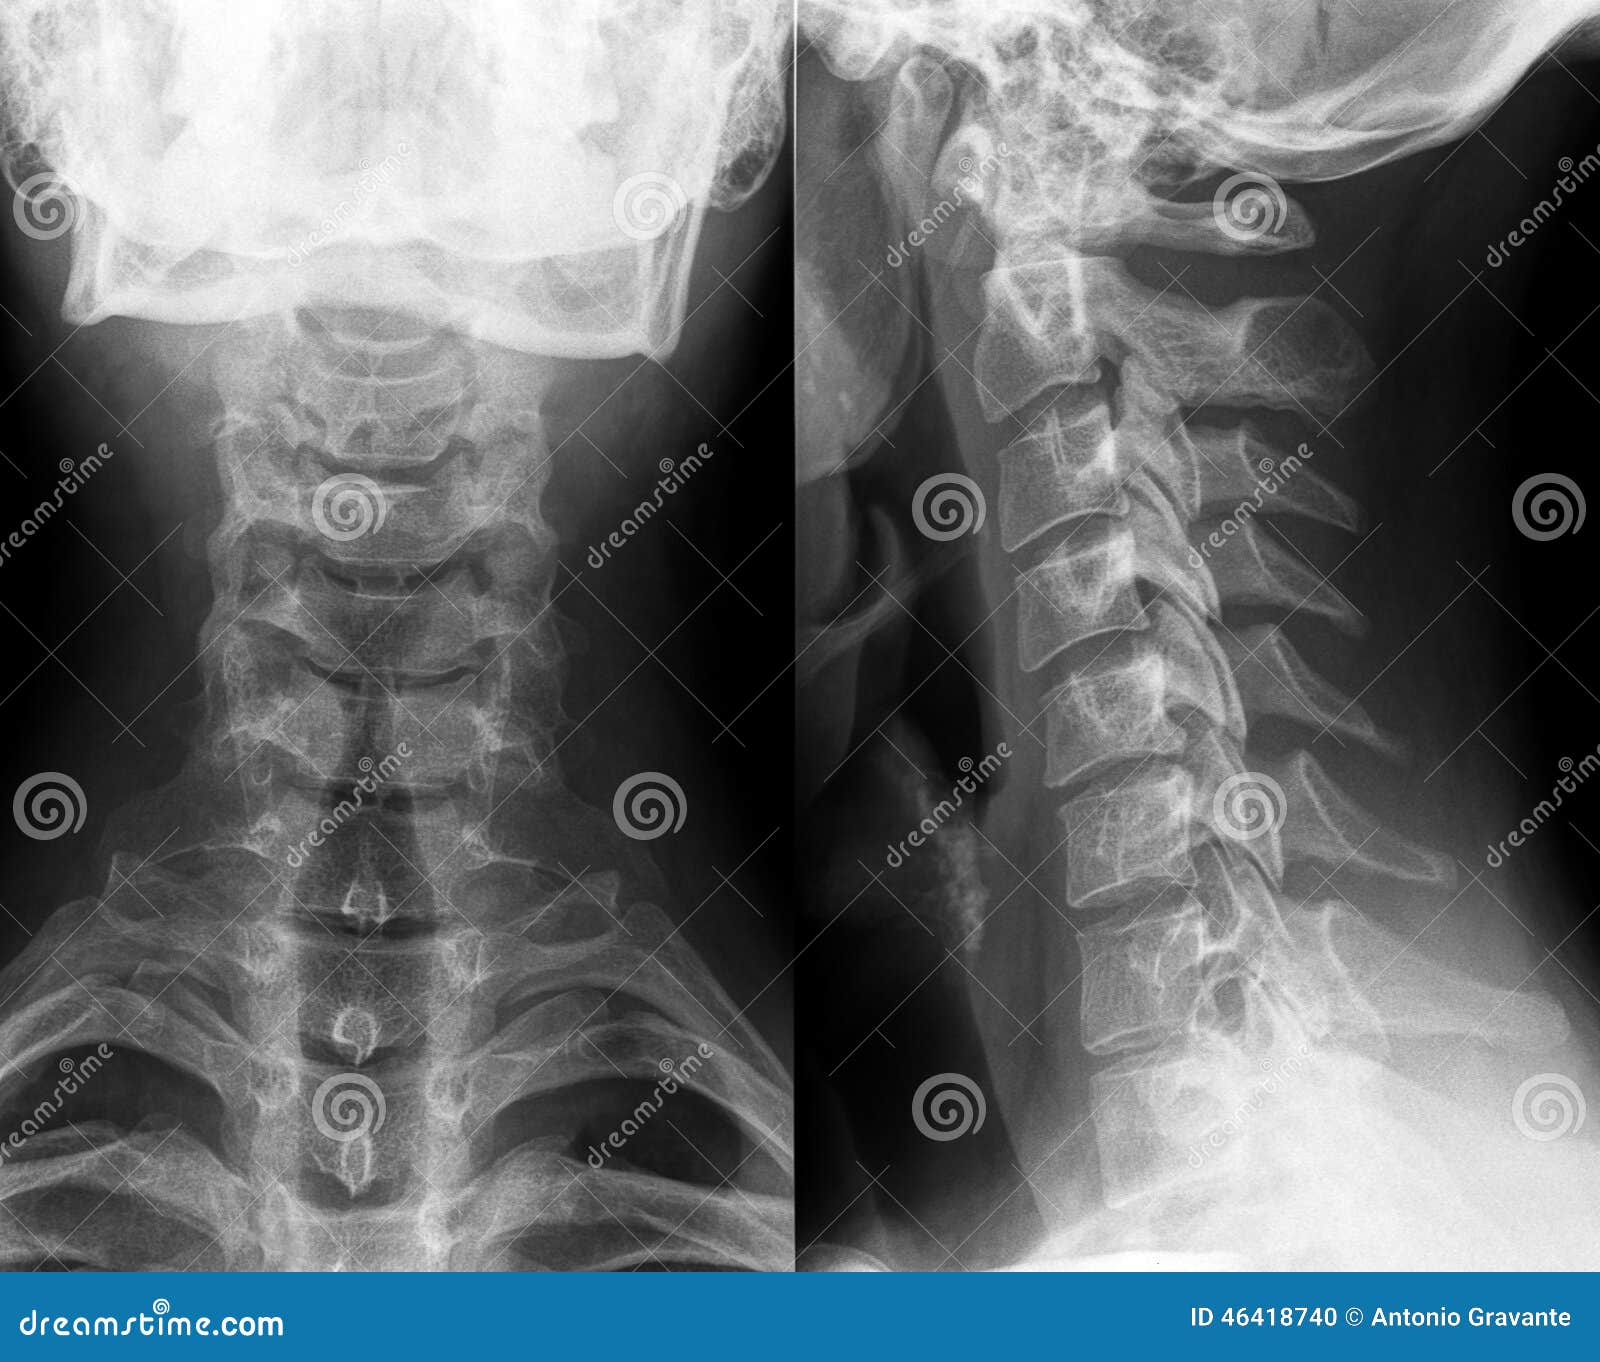 xray of neck and cervical spine